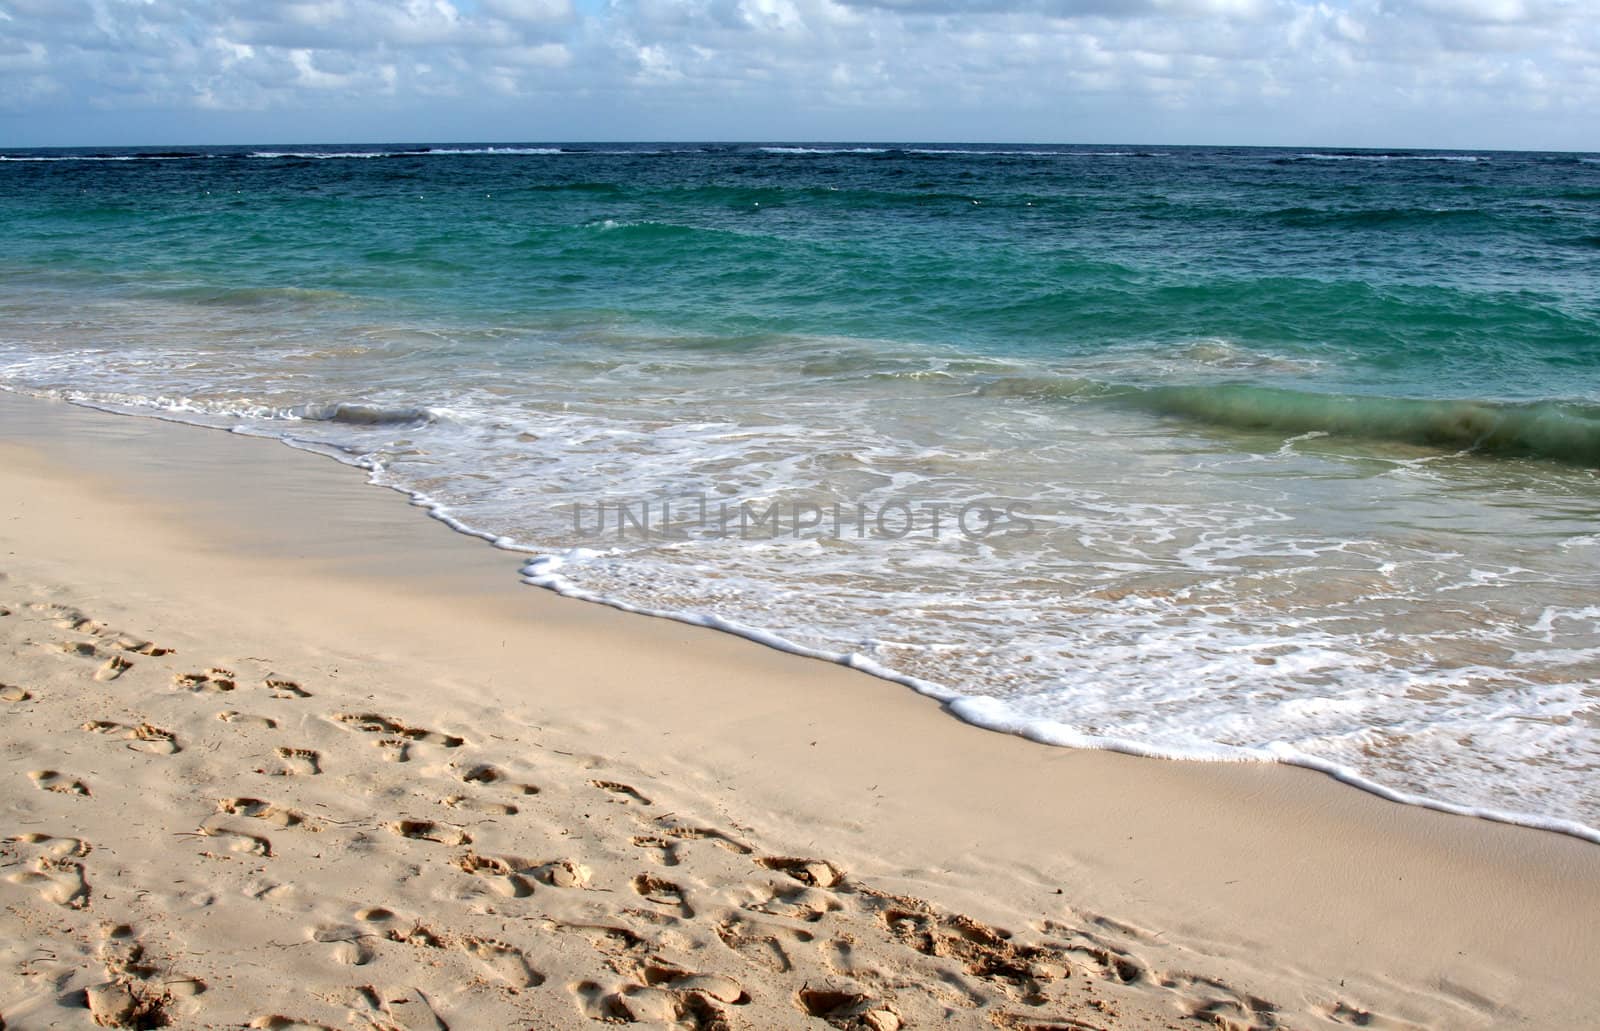 The beautiful beach of Punta Cana, Dominican Republic.  Shot a couple hours after dawn.